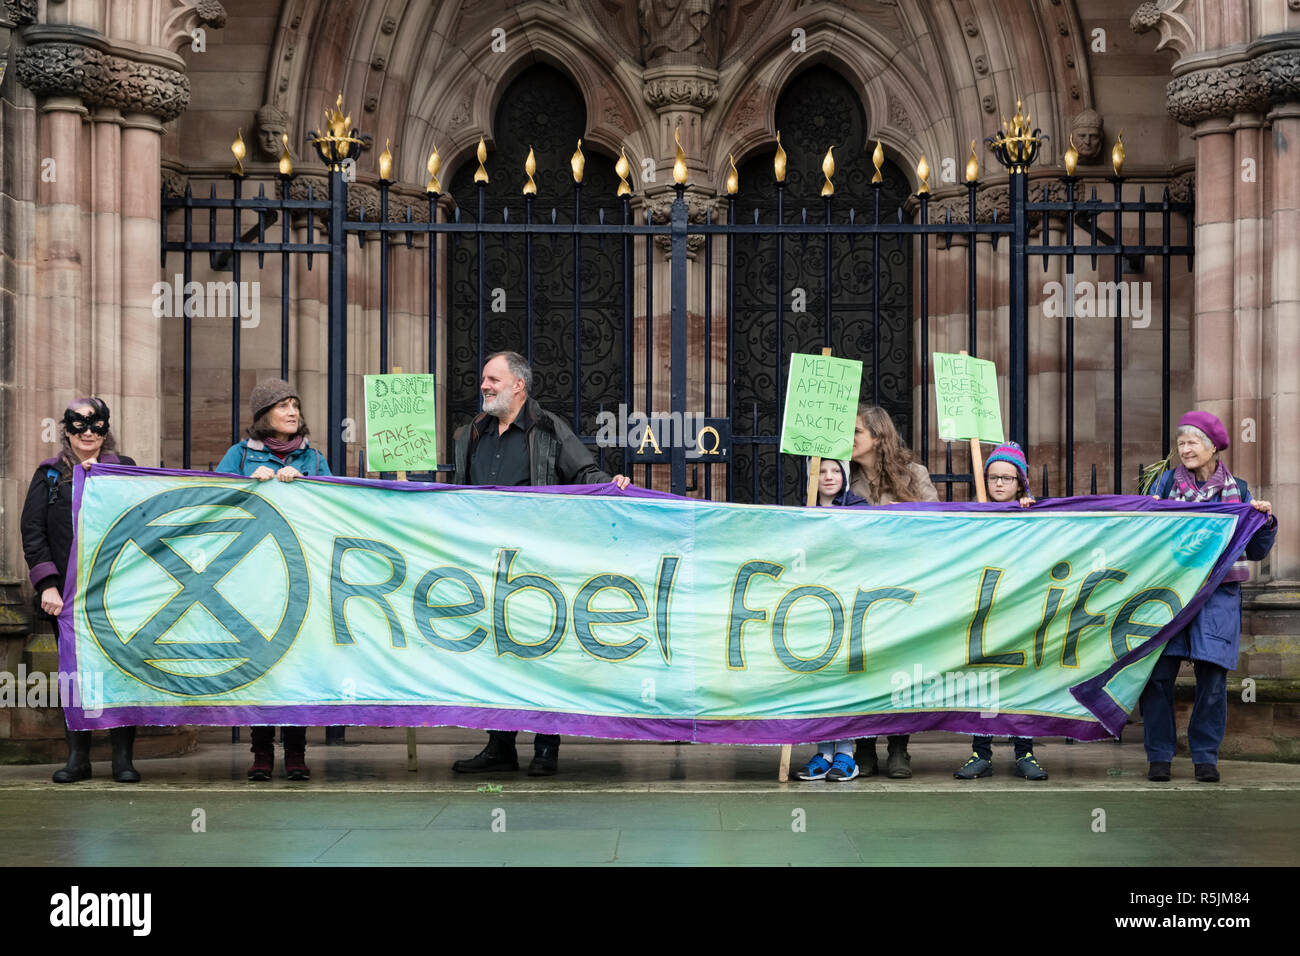 Hereford, UK. 1st December, 2018. The newly formed local branch of the Extinction Rebellion movement (climate change activists) demonstrate outside the cathedral in this old city . Credit: Alex Ramsay/Alamy Live News Stock Photo